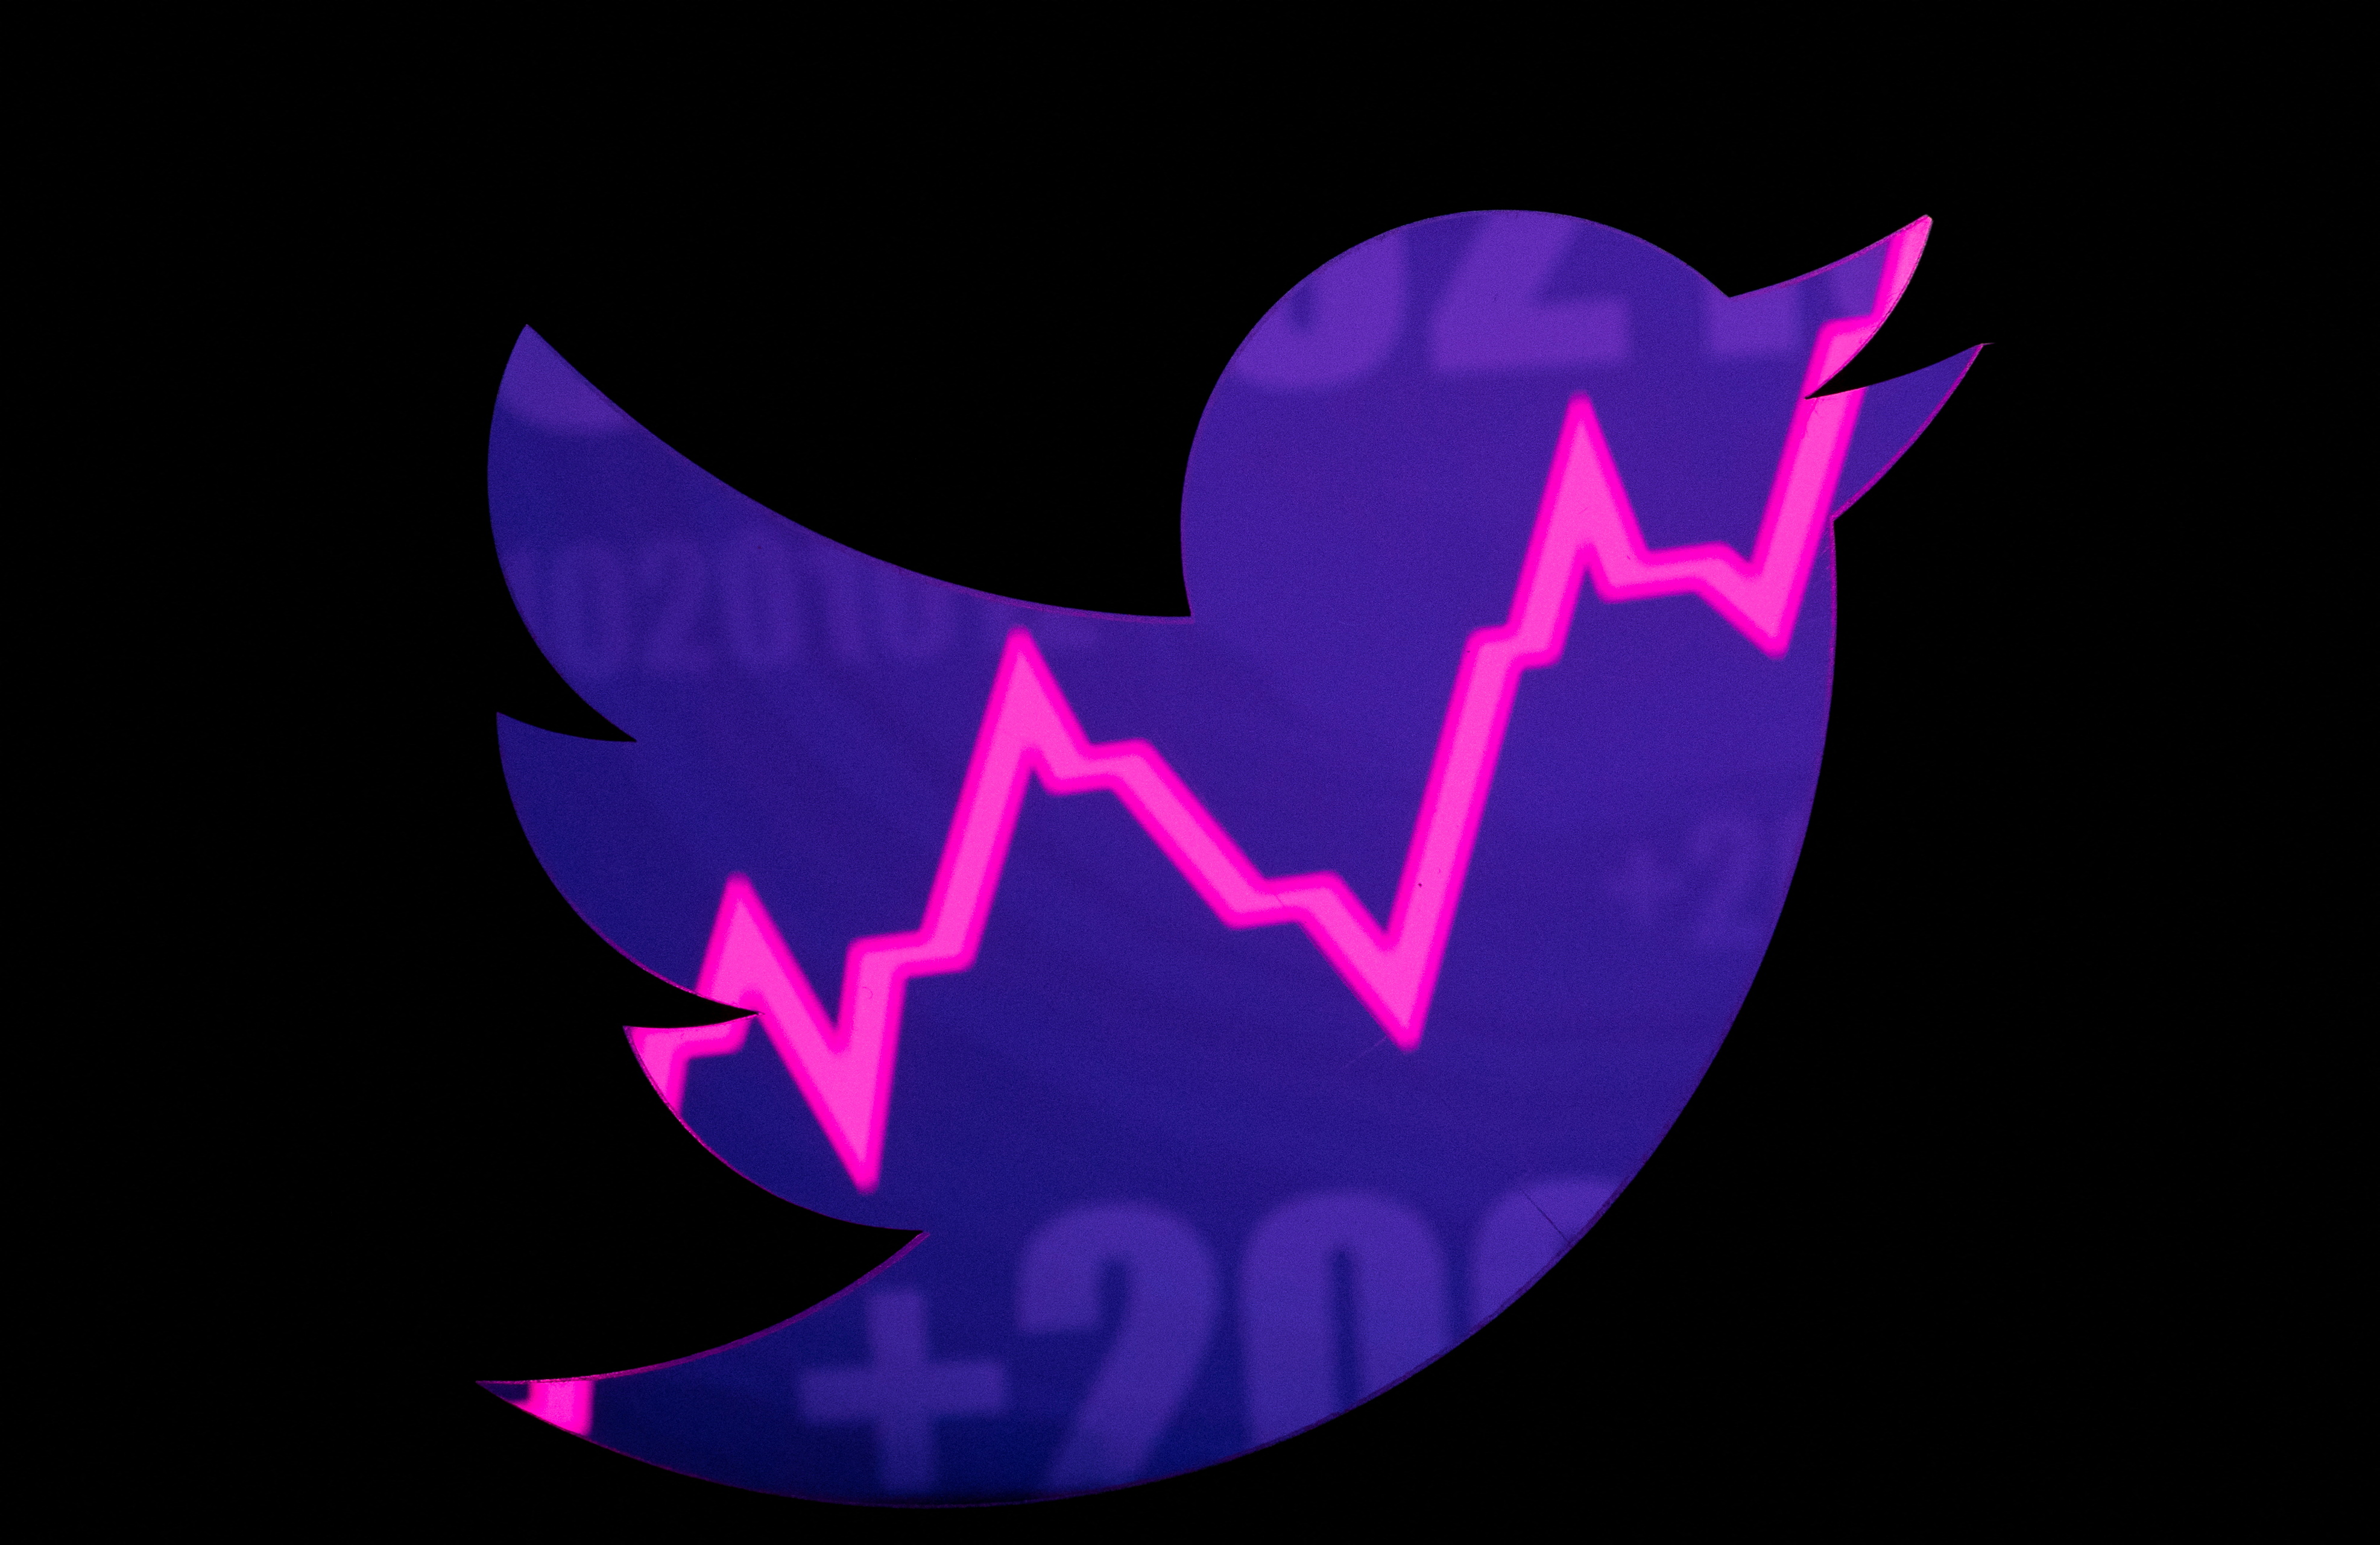 Illustration shows Twitter logo and rising stock graph